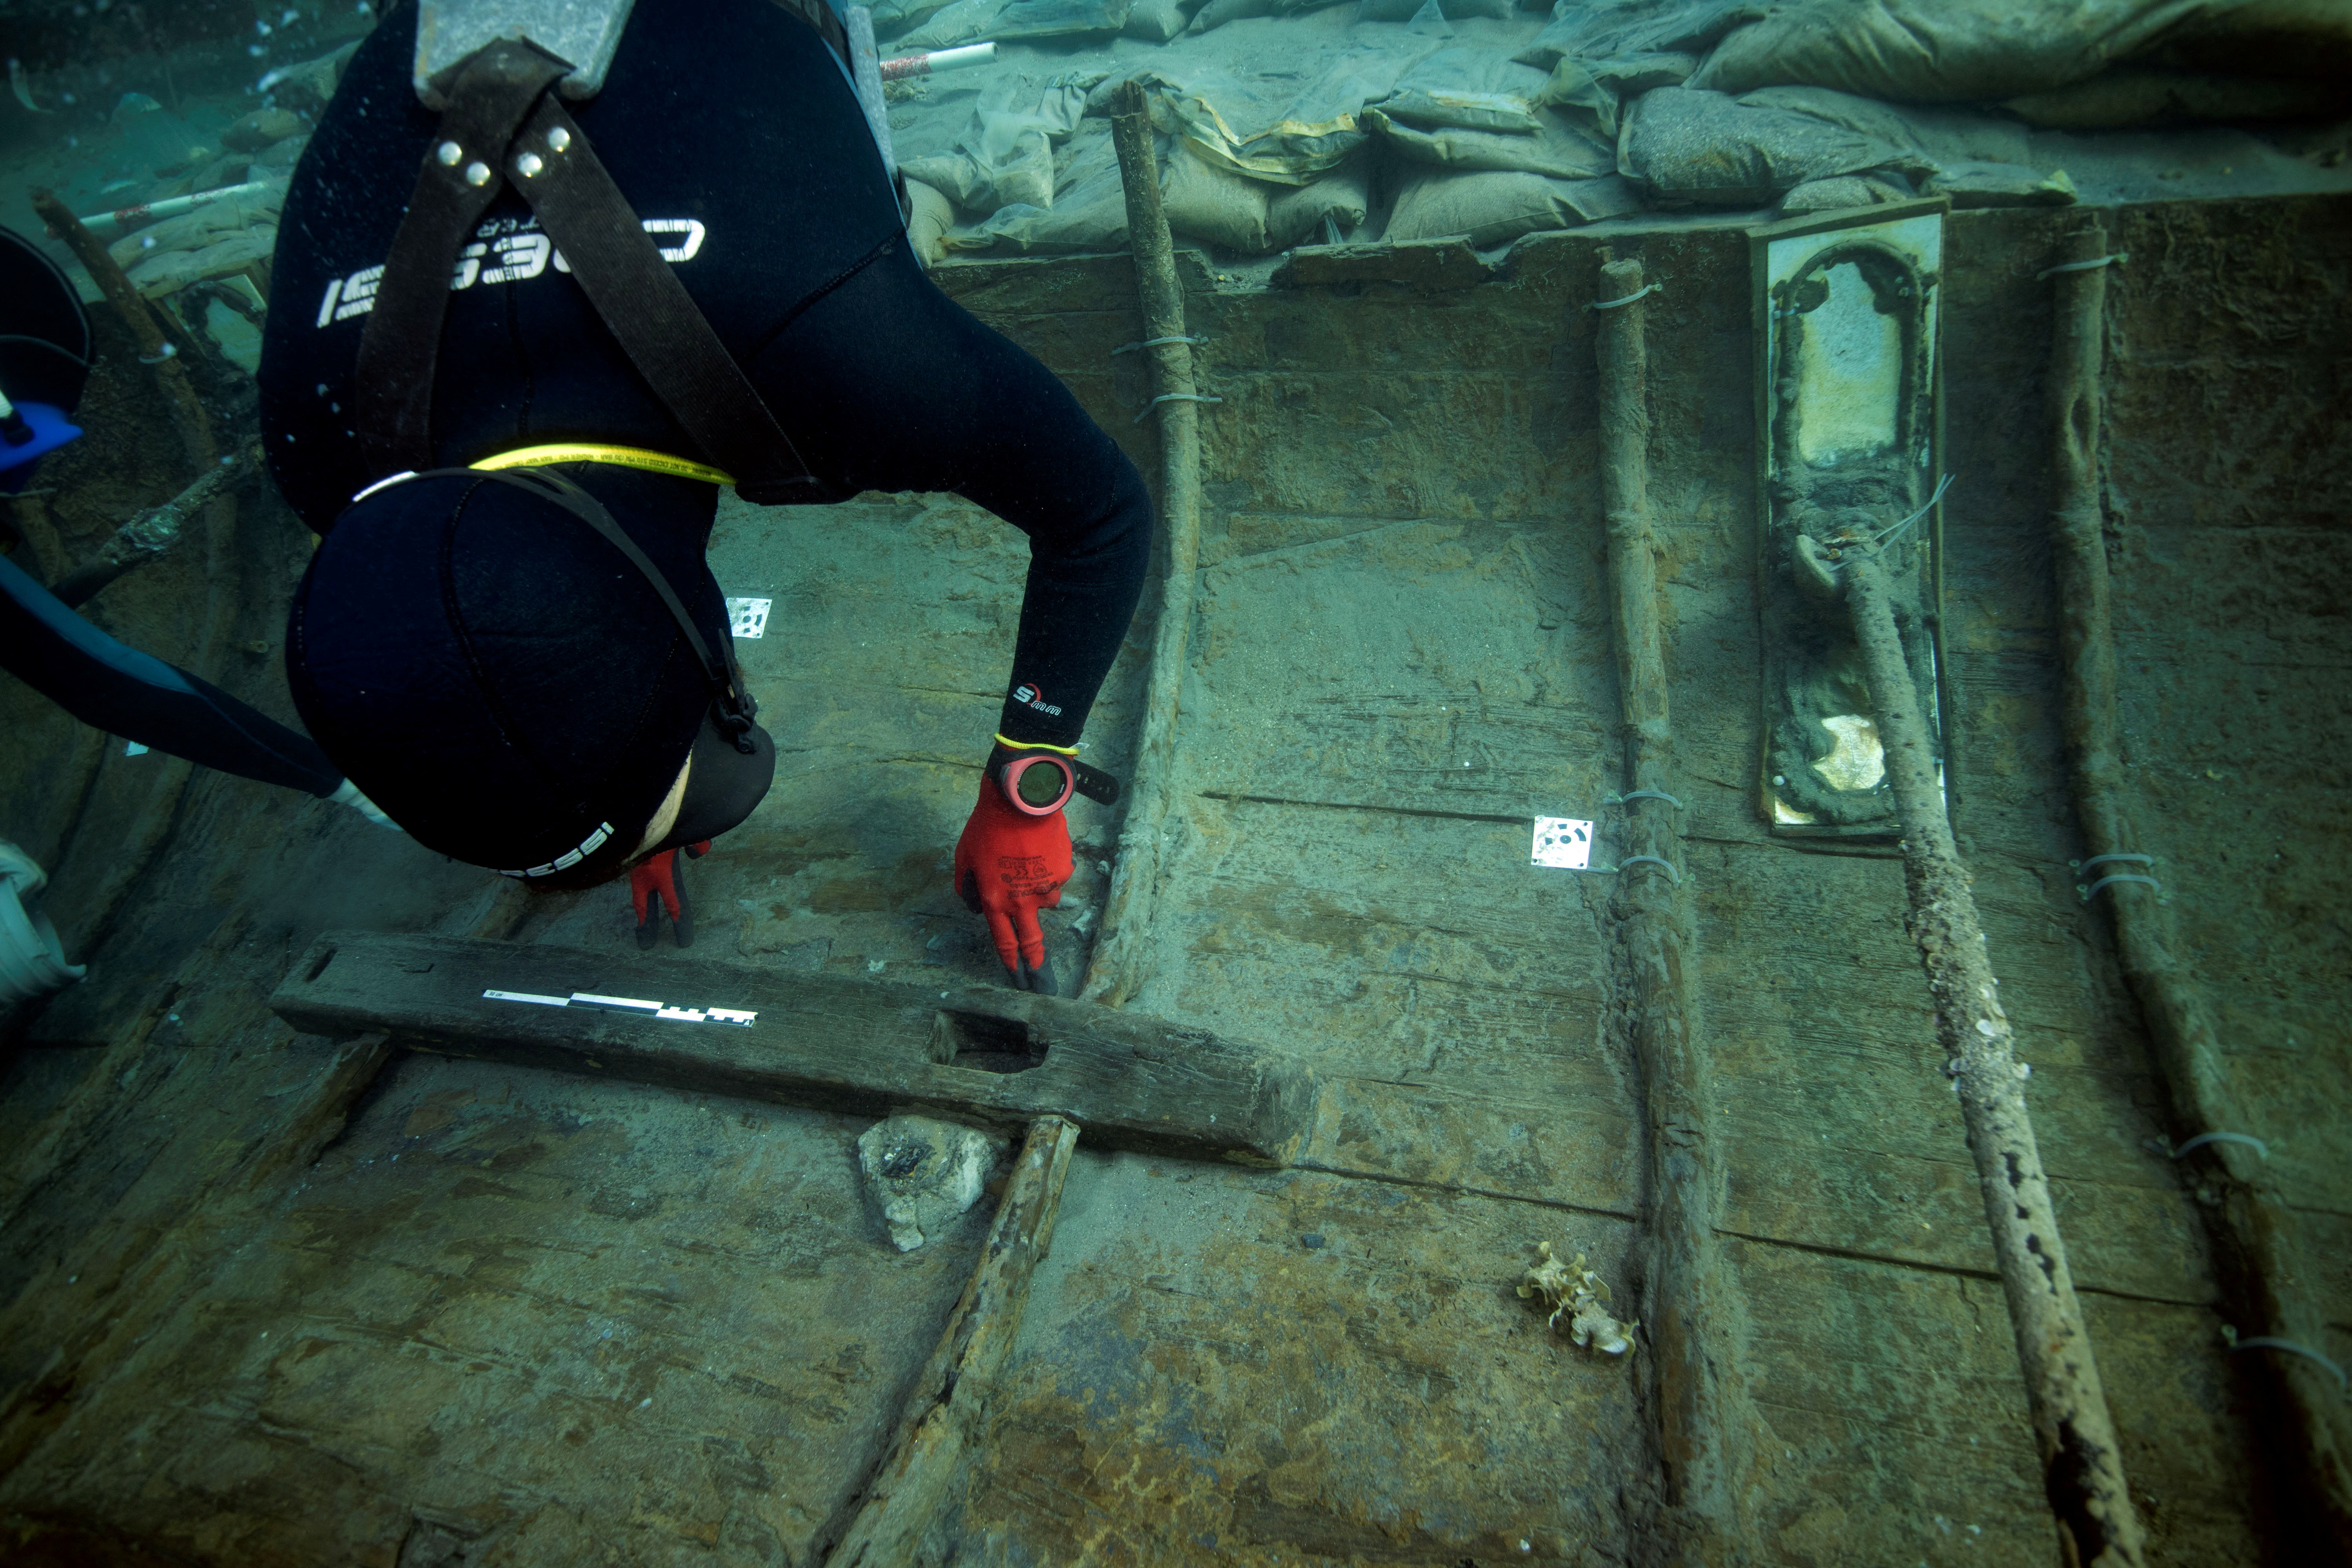 Spanish archaeologists plan rescue of 2,500-year-old Phoenician shipwreck |  Reuters